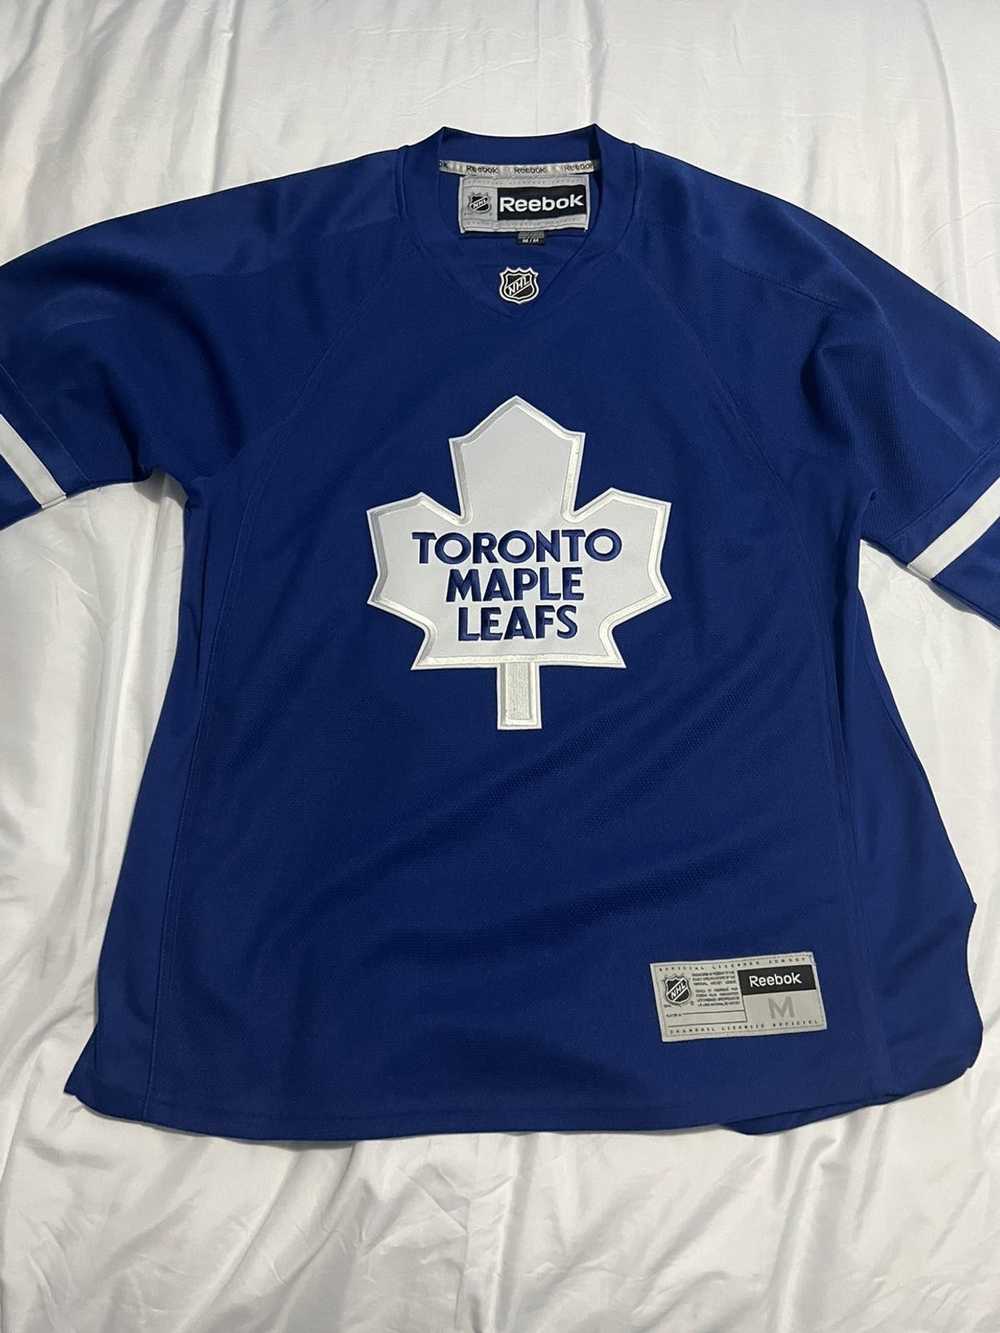 2014 TORONTO MAPLE LEAFS TEAM SIGNED WINTER CLASSIC LICENSED JERSEY PHANEUF